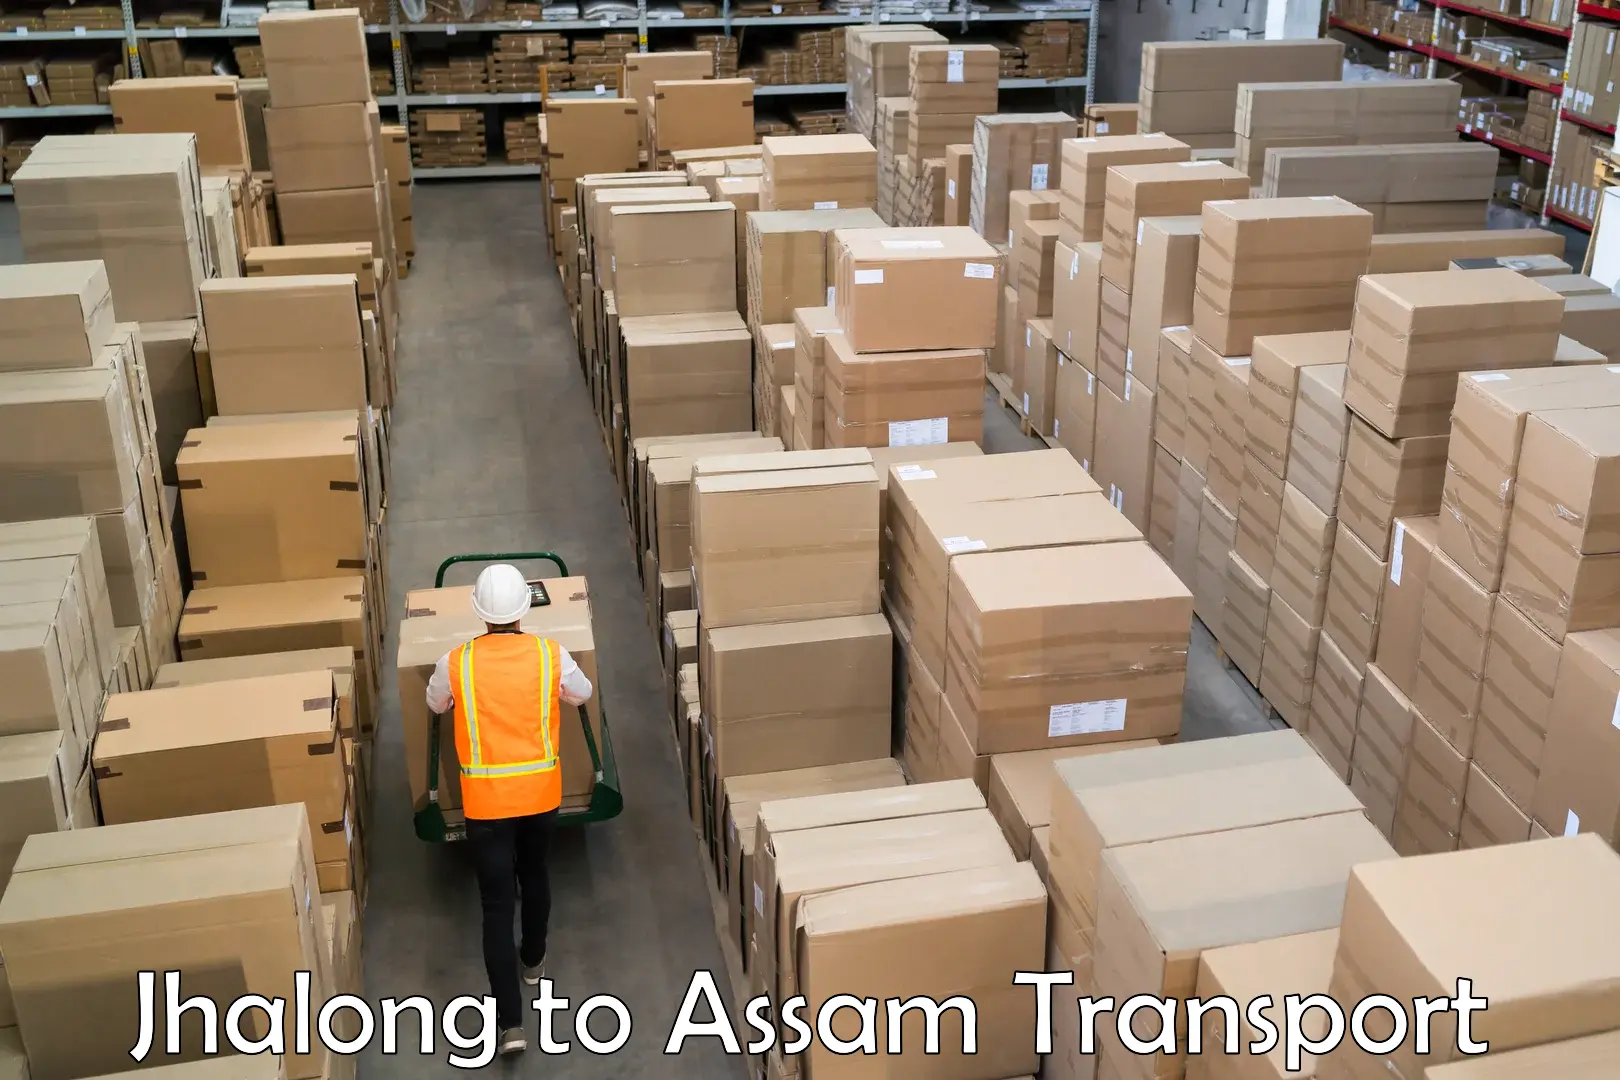 Transport bike from one state to another Jhalong to Assam